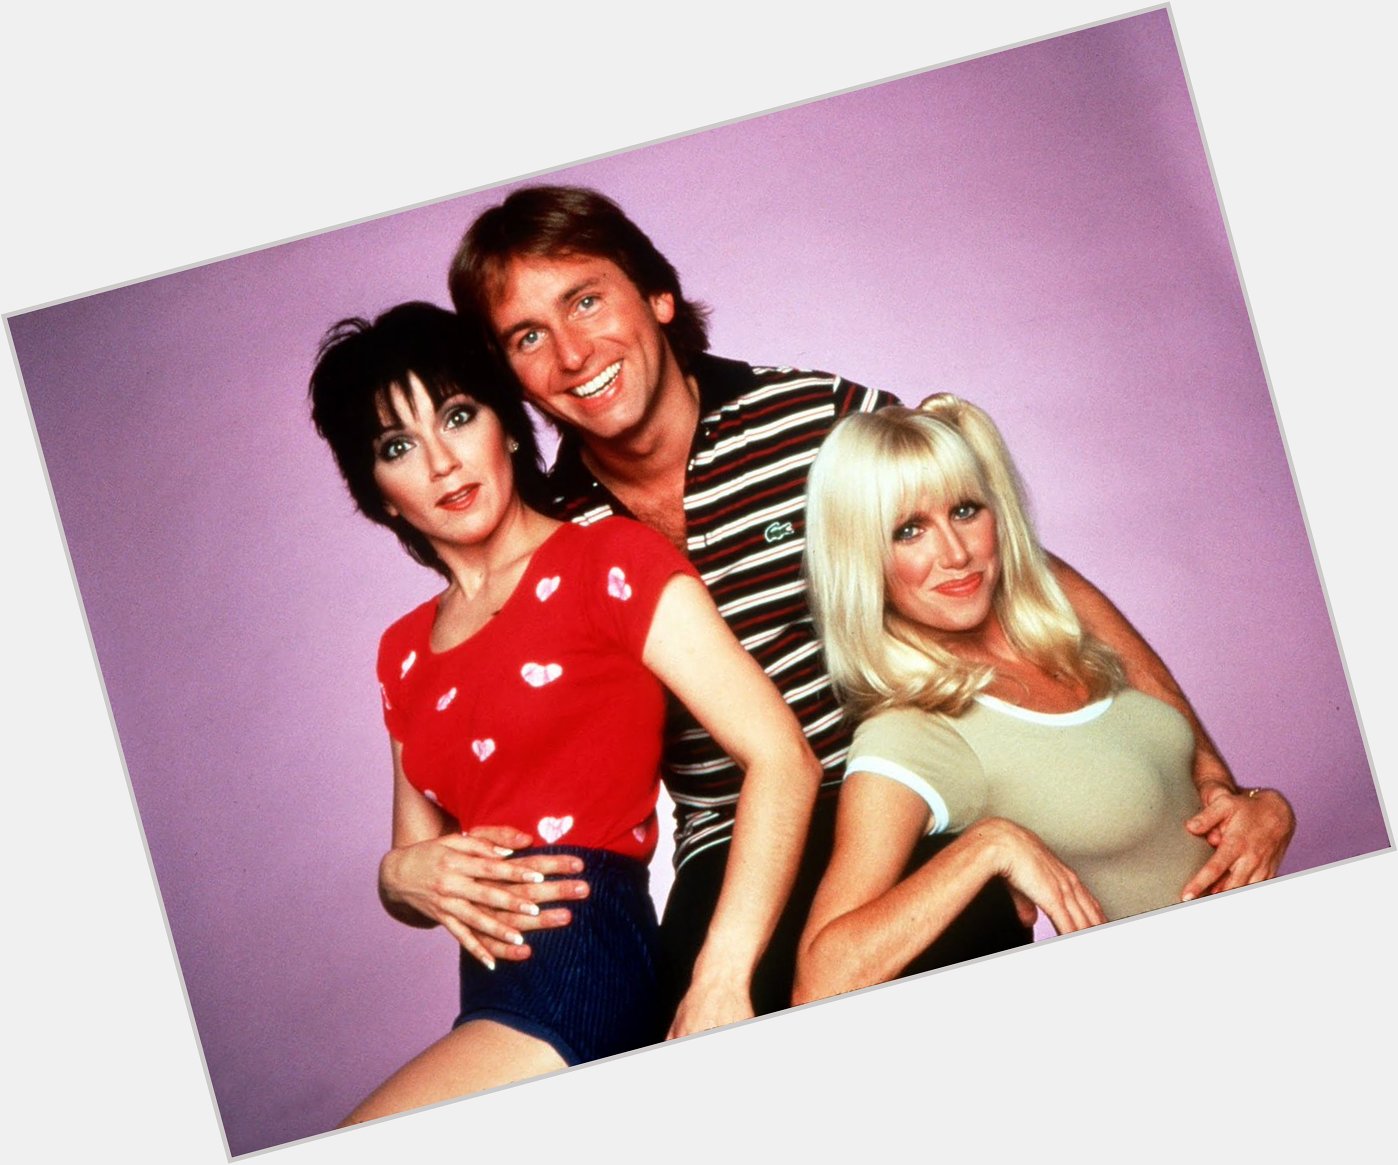 Happy Birthday to Suzanne Somers(far right) who turns 71 today! 